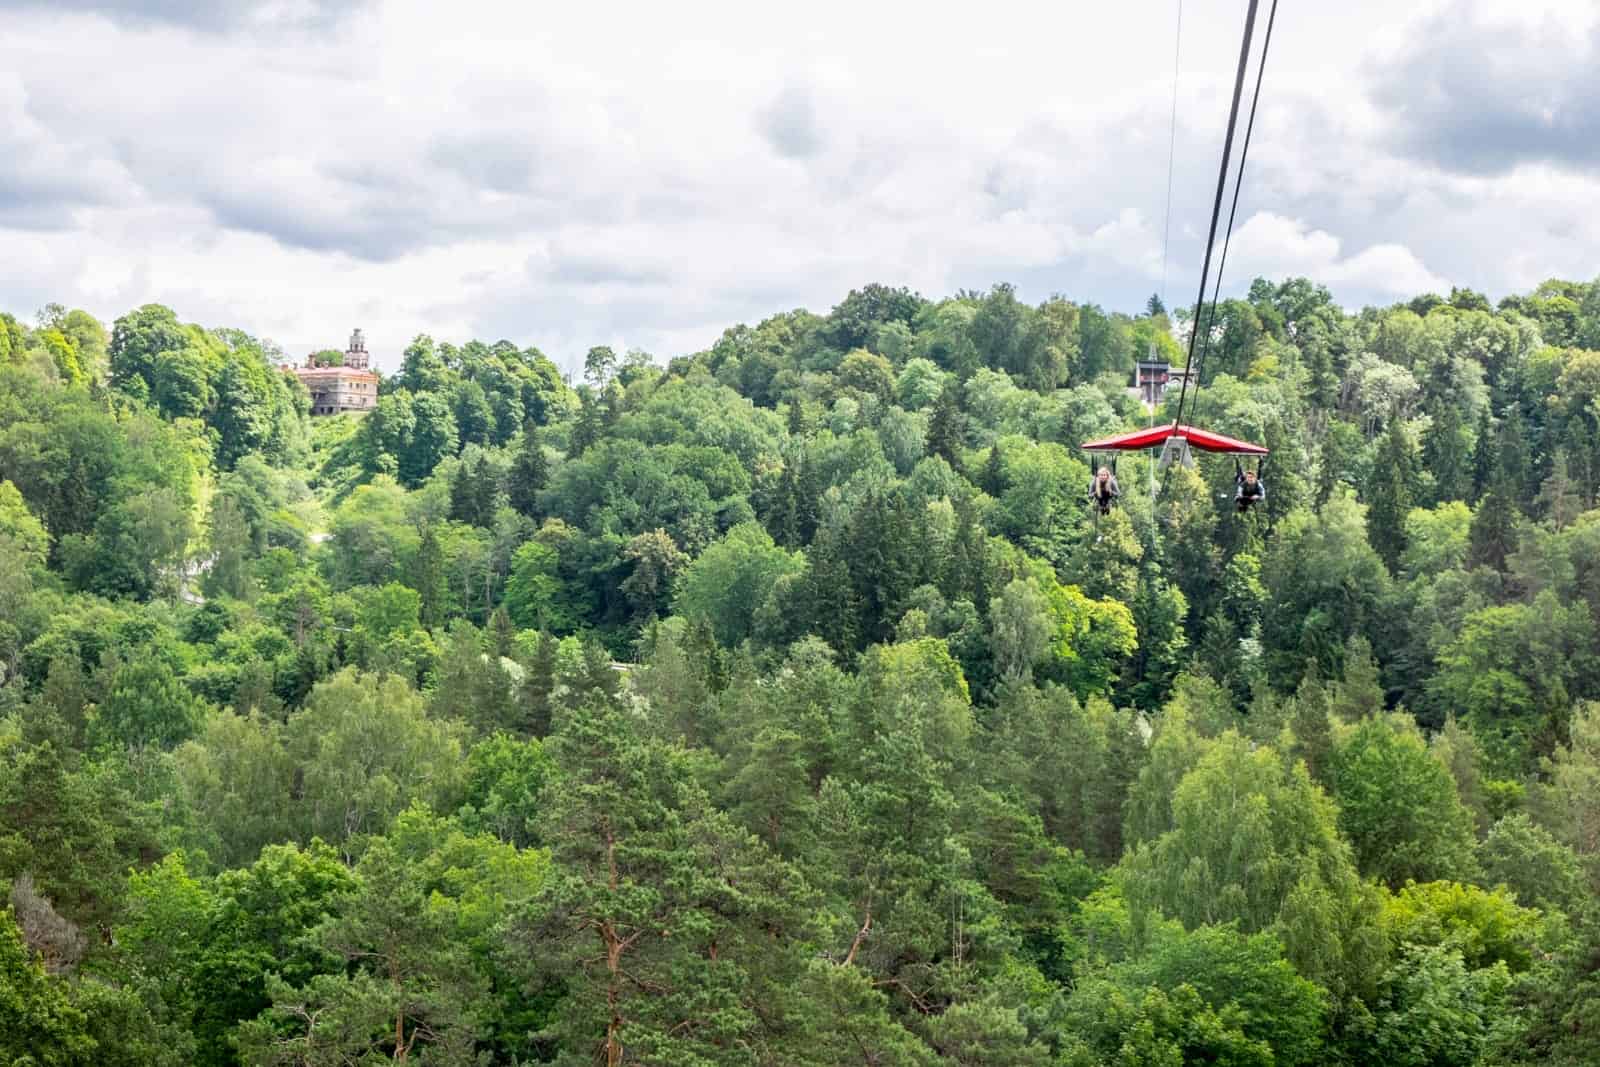 The zipline in Sigulda, Gauja National Park, Latvia attached the the cable car line